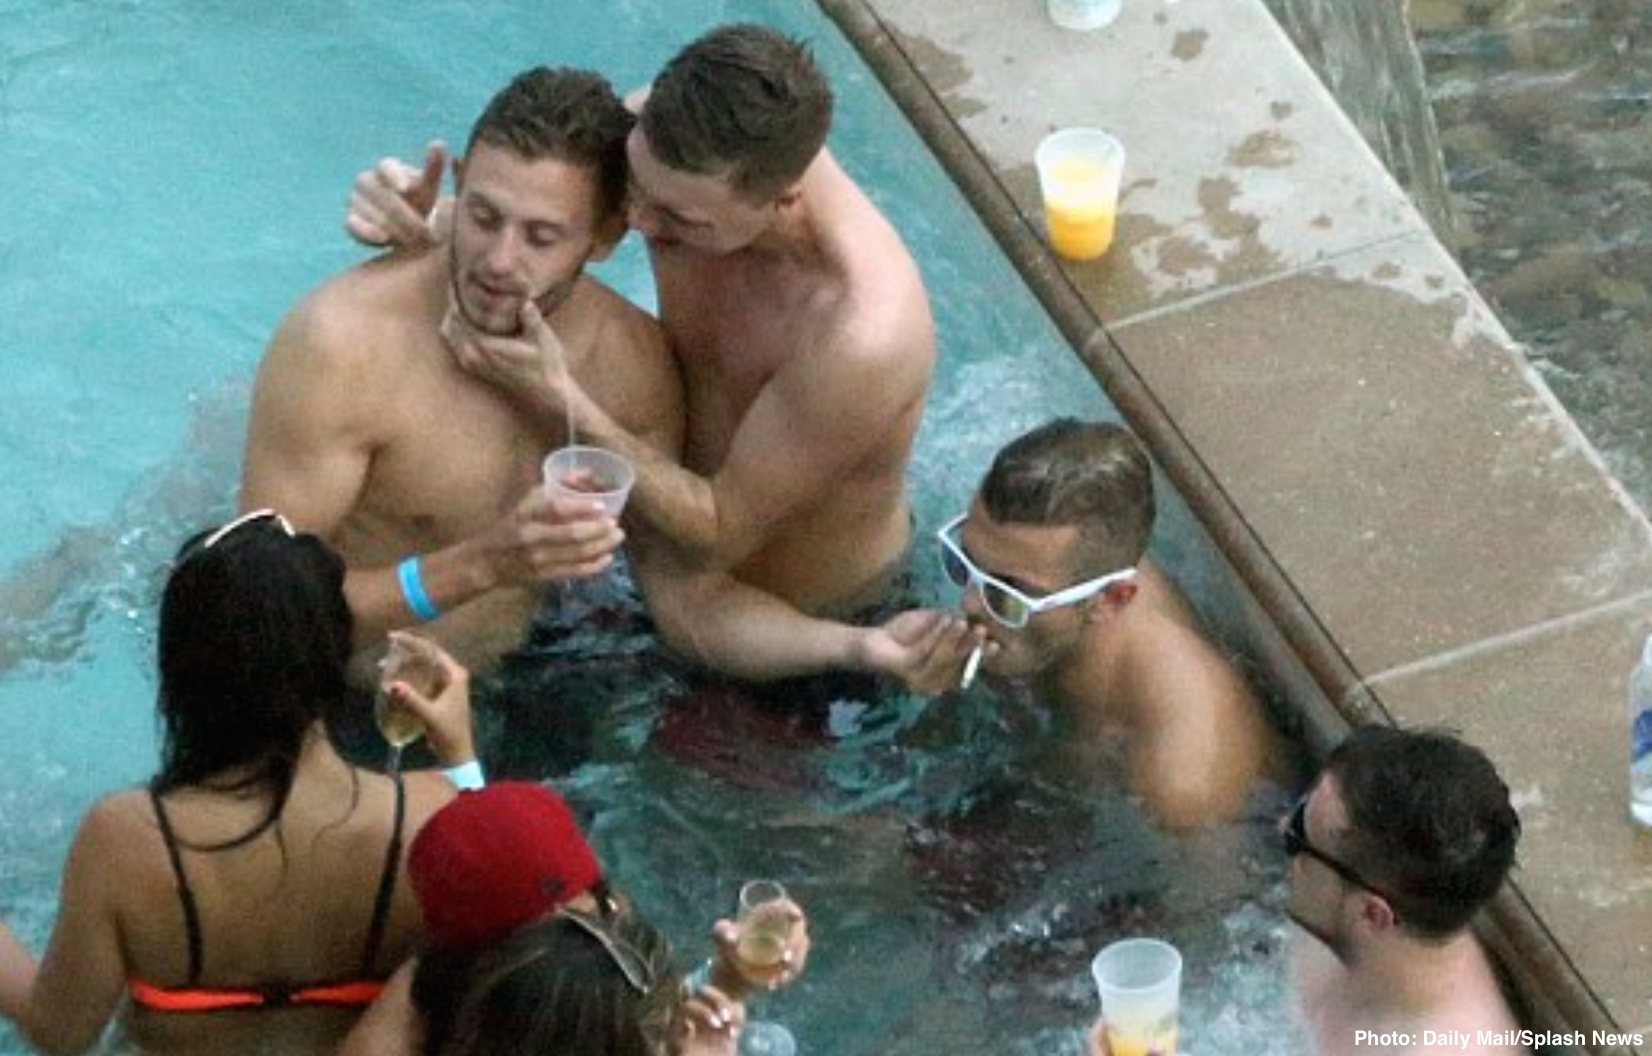 Some of the Best World Cup Winners Have Been Smokers, So Why Did Arsenal's Wilshere Apologise?